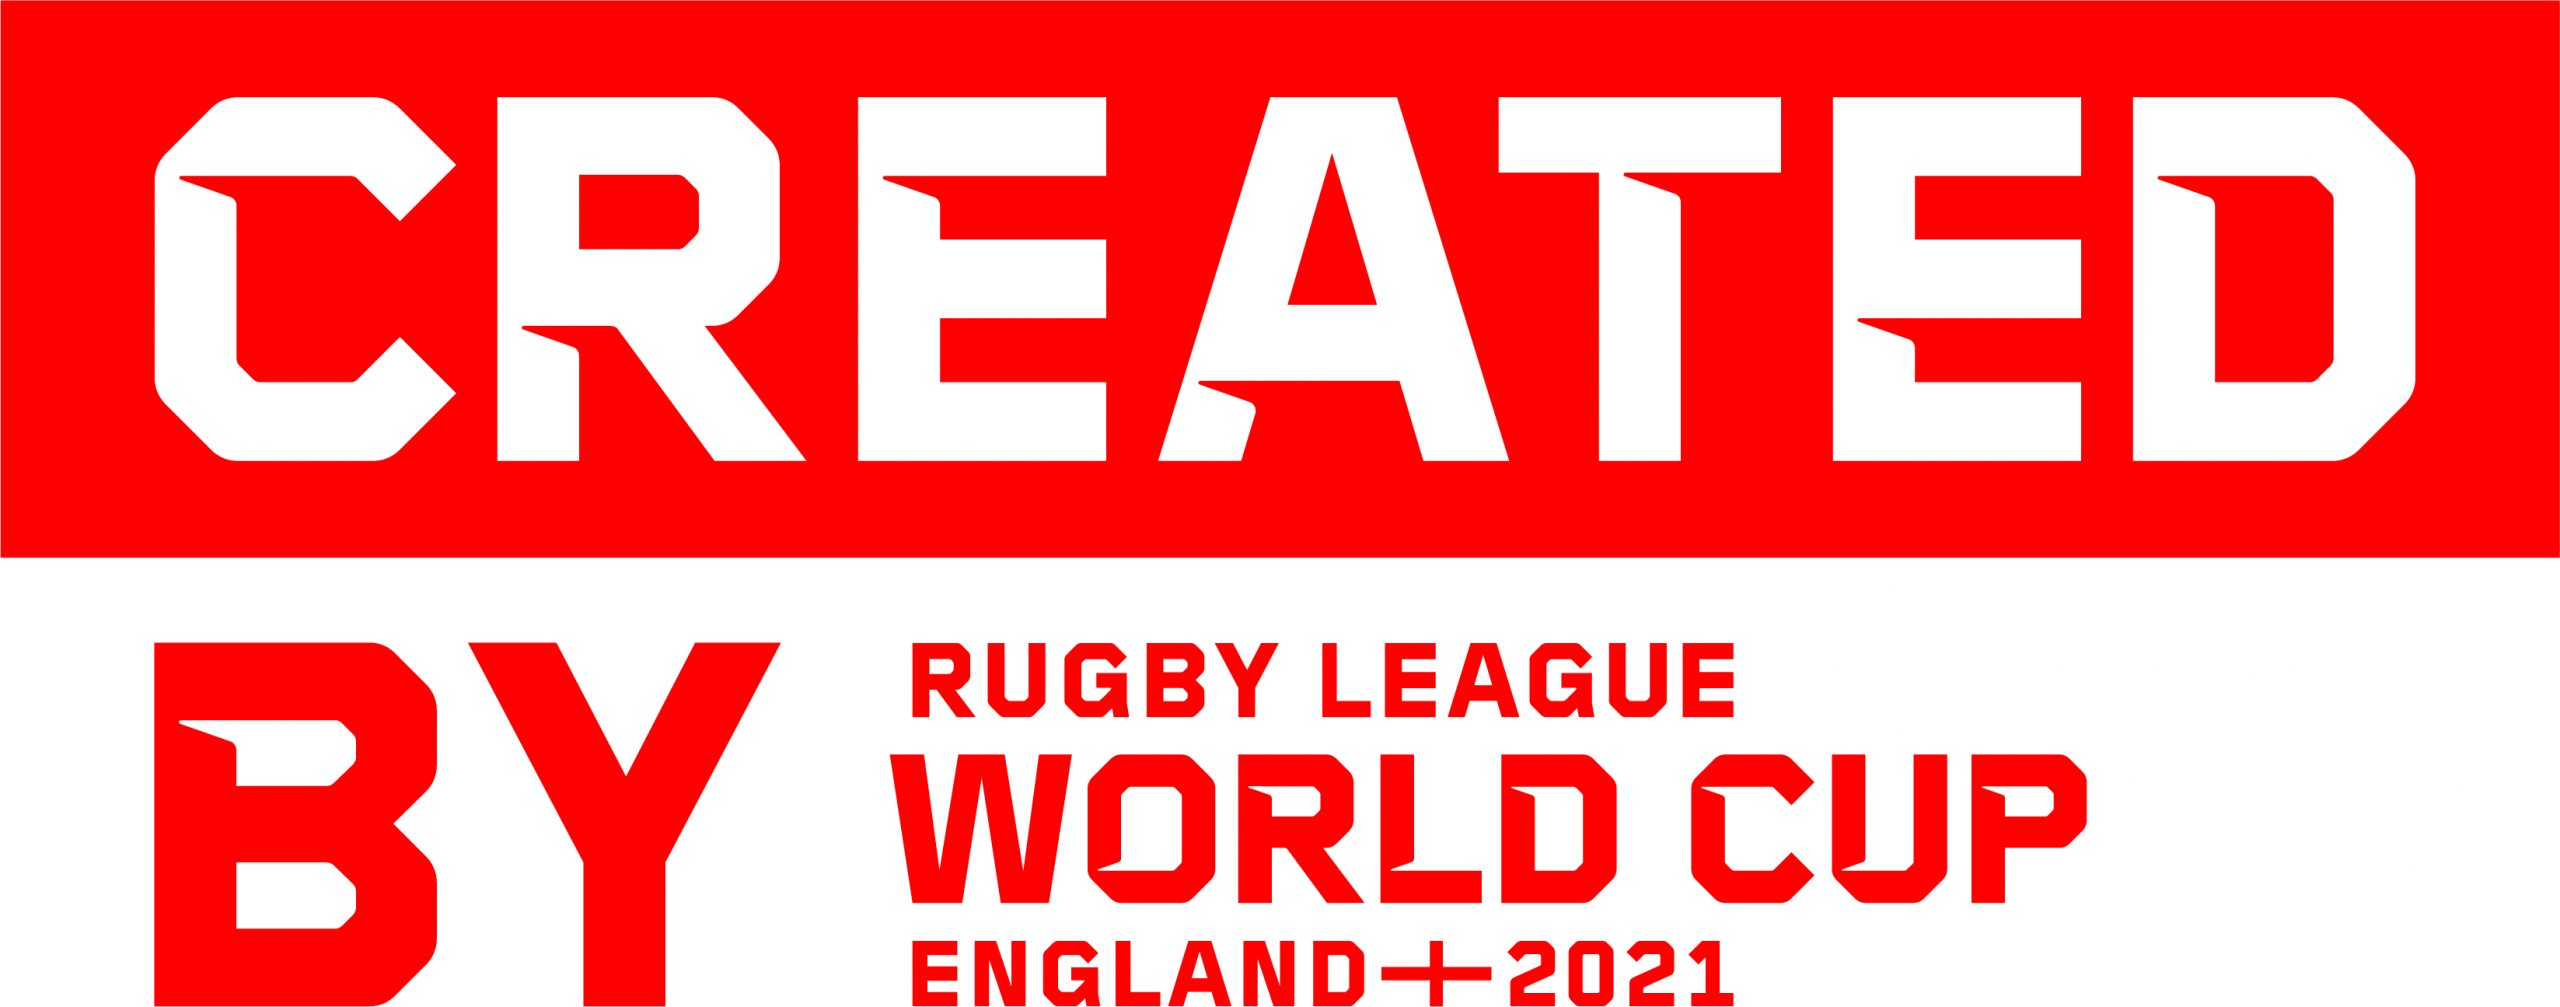 Created by Rugby League World Cup England 2021